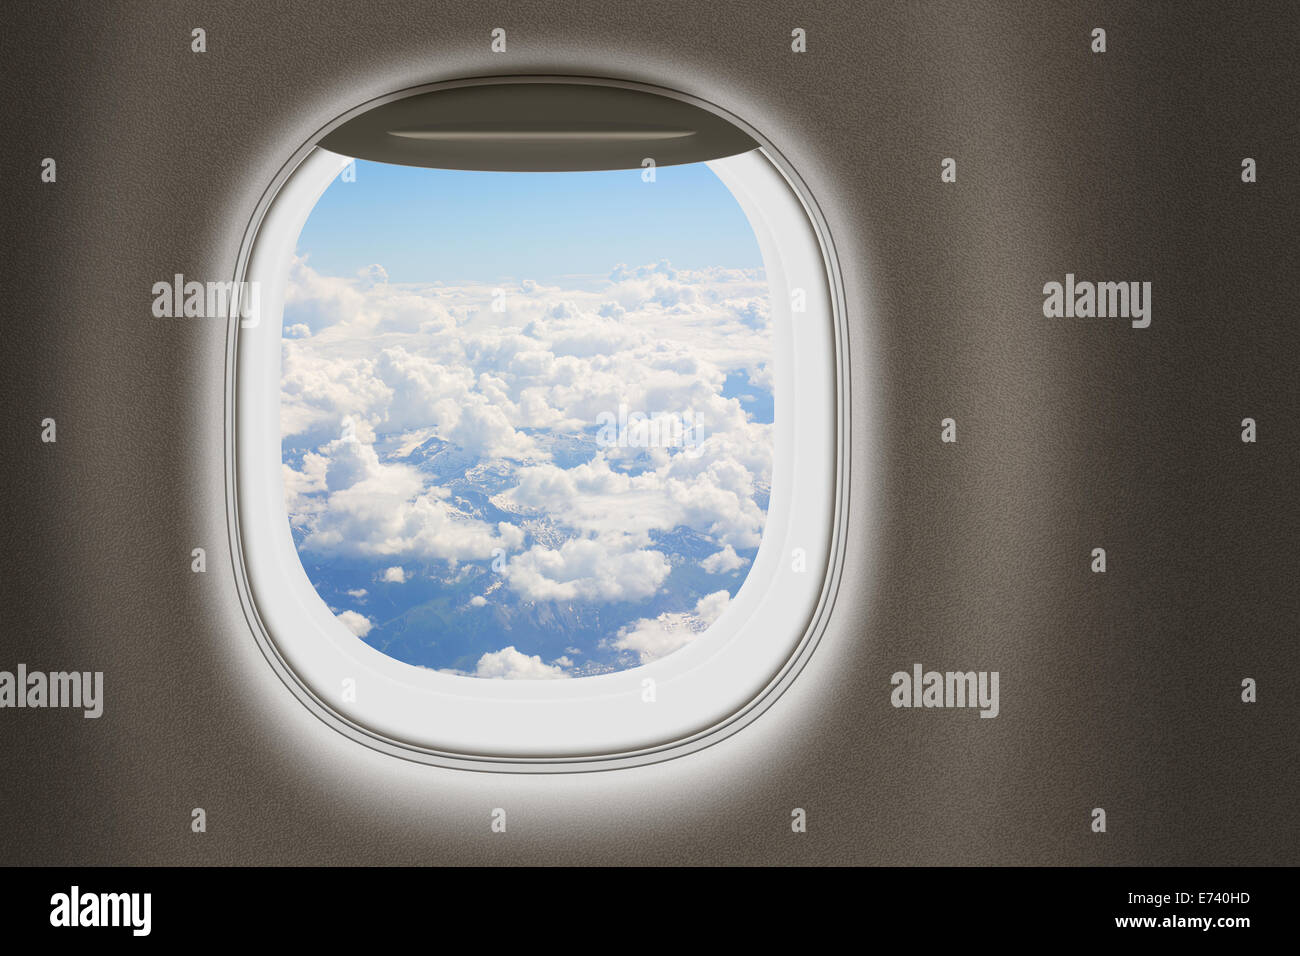 Airplane or jet window, travel and tourism concept. Stock Photo